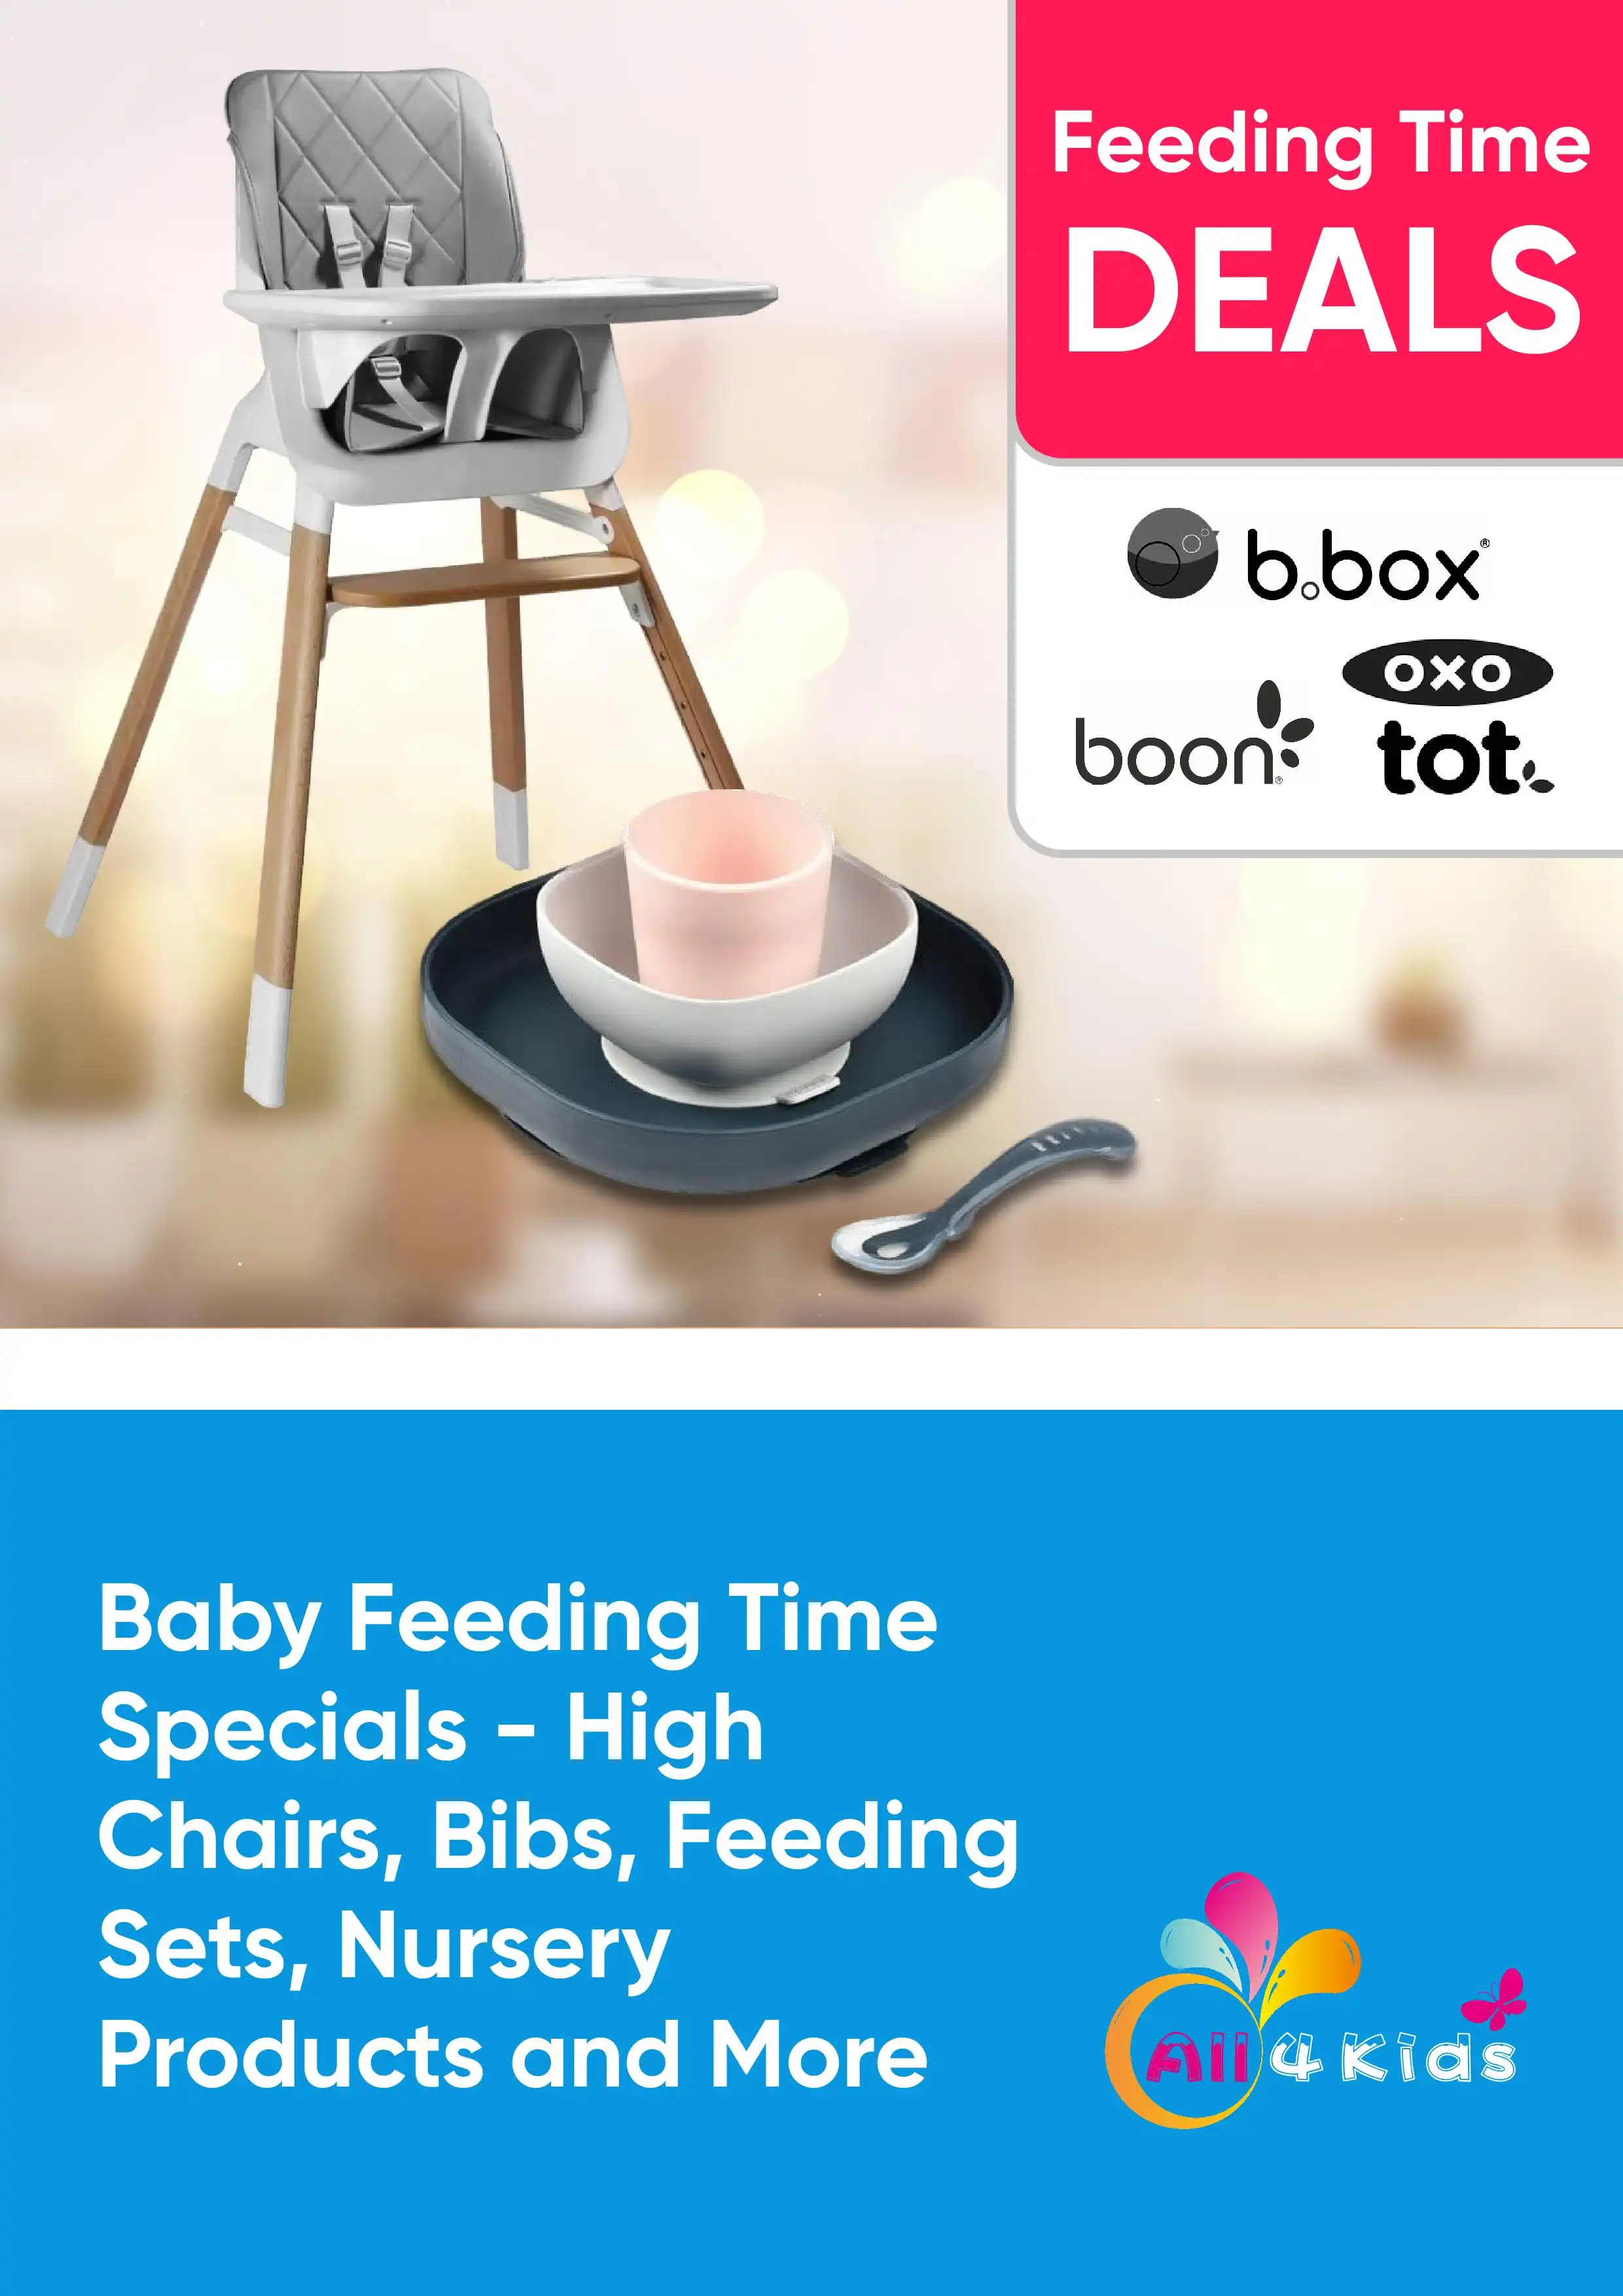 Baby Feeding Time Specials - High Chairs, Bibs, Feeding Sets, Nursery Products and More